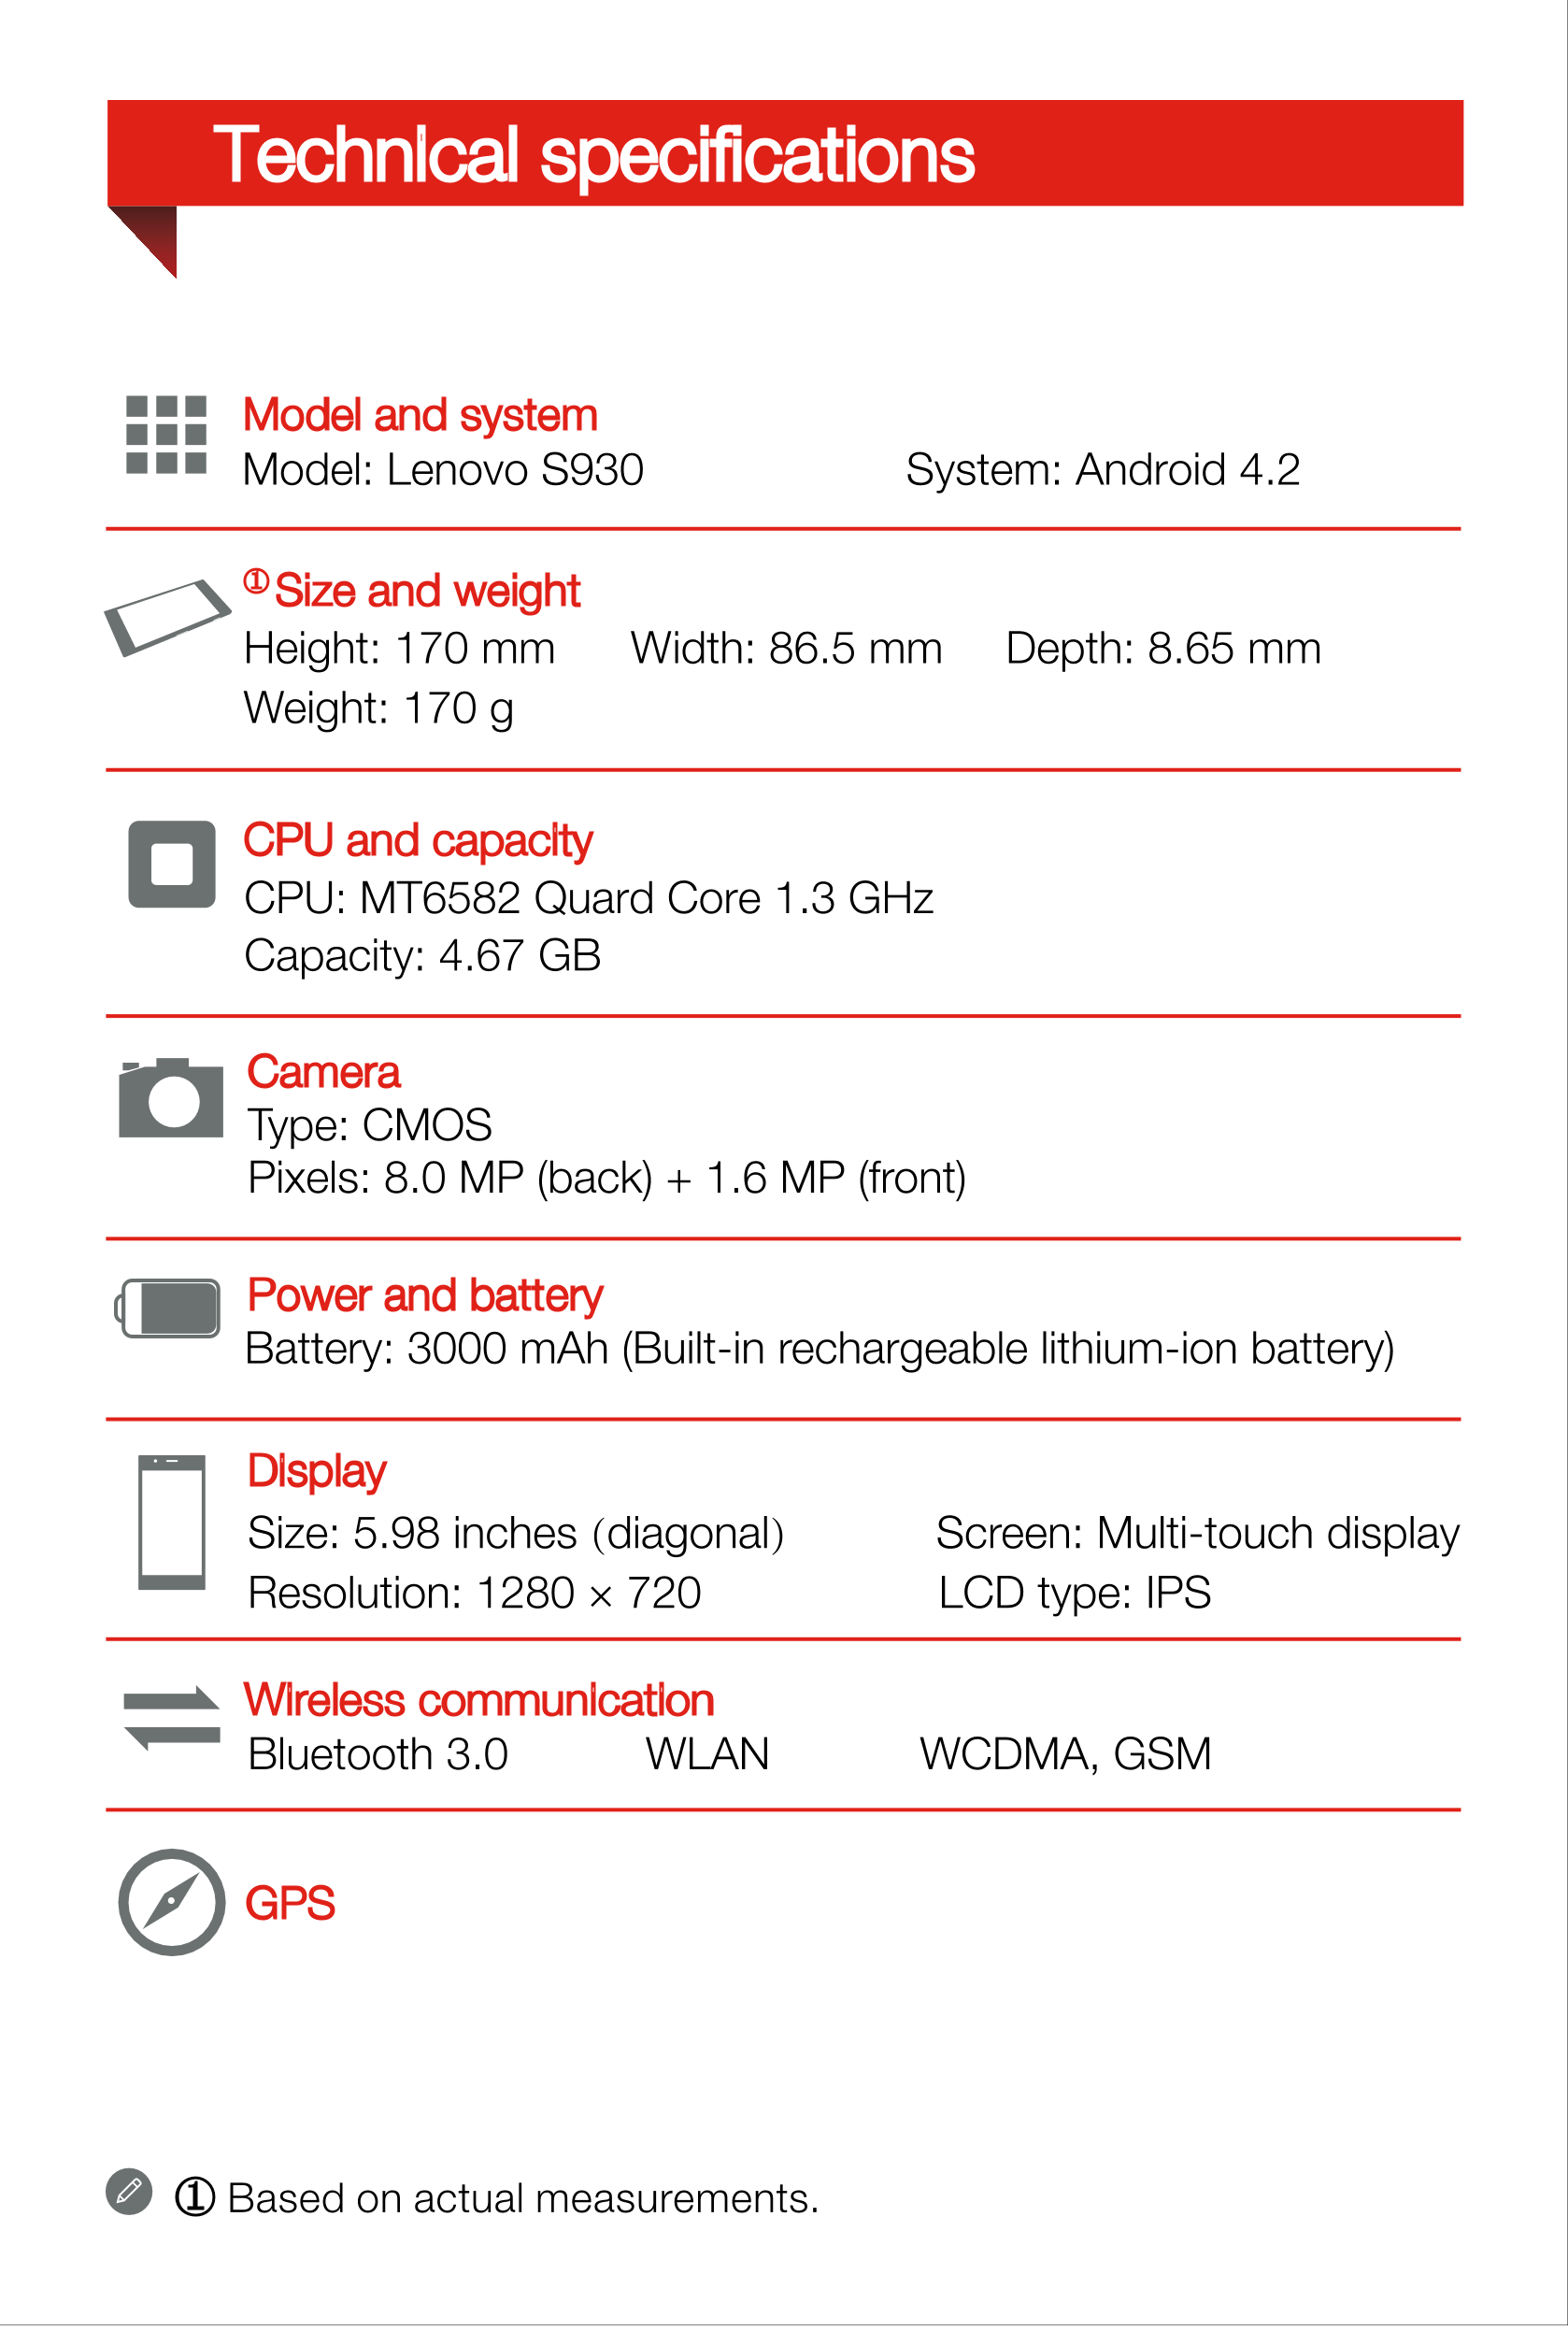 Technical speciﬁcations
For more information about Lenovo Mobile Phone functions, 
Regulatory Notices and other useful manuals, 